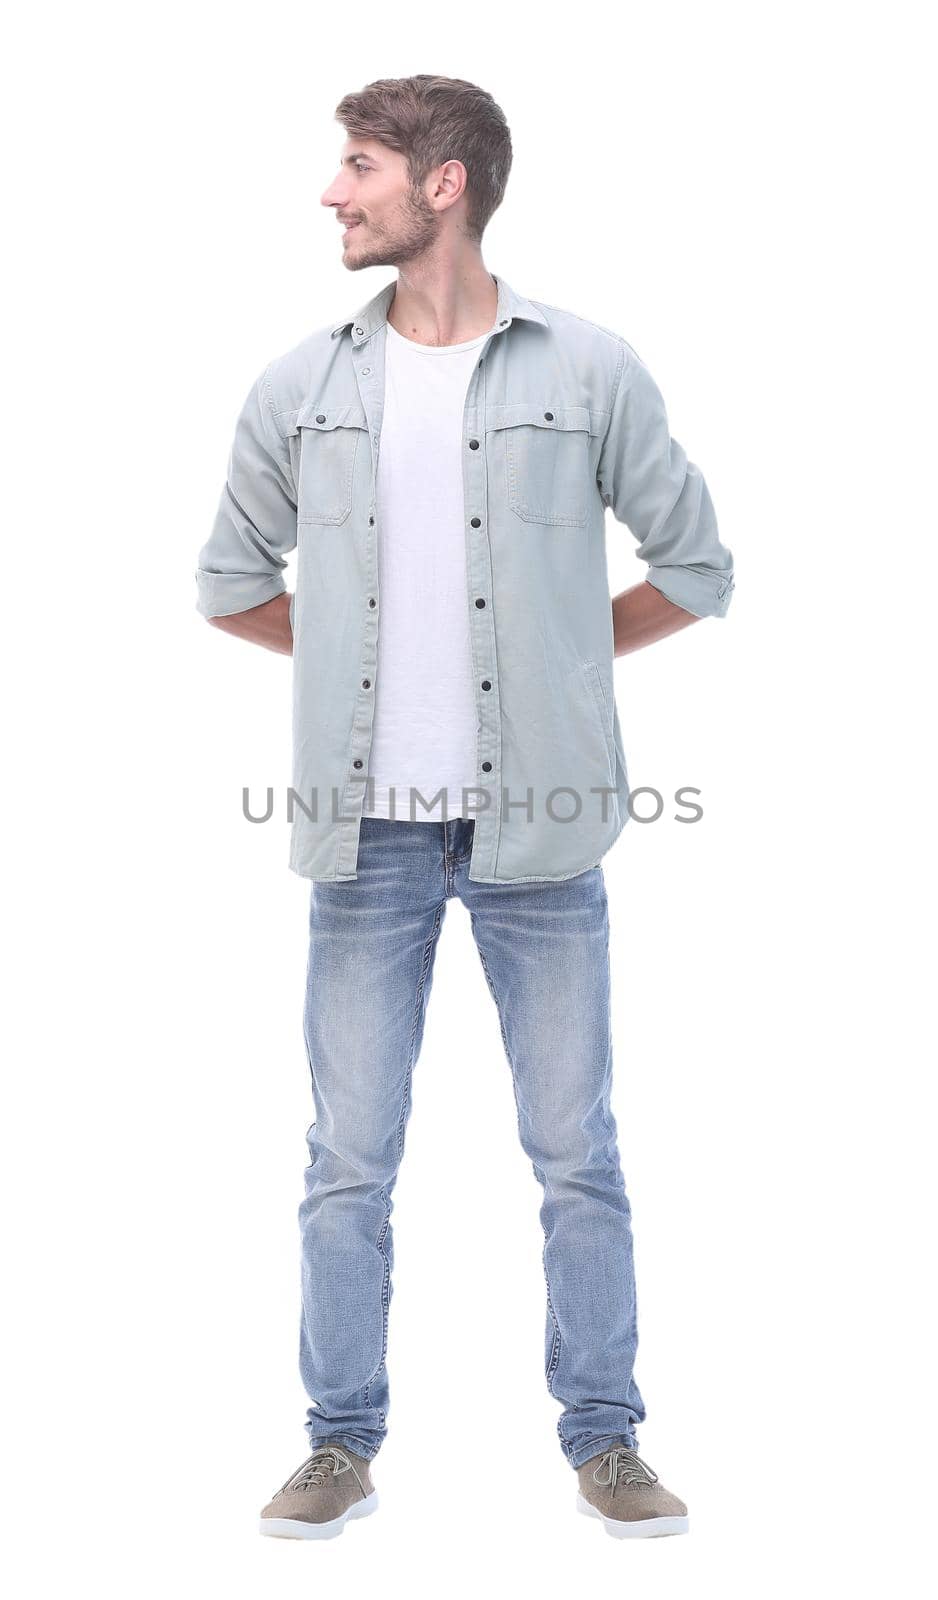 in full growth. portrait of modern young man looking away .isolated on white background